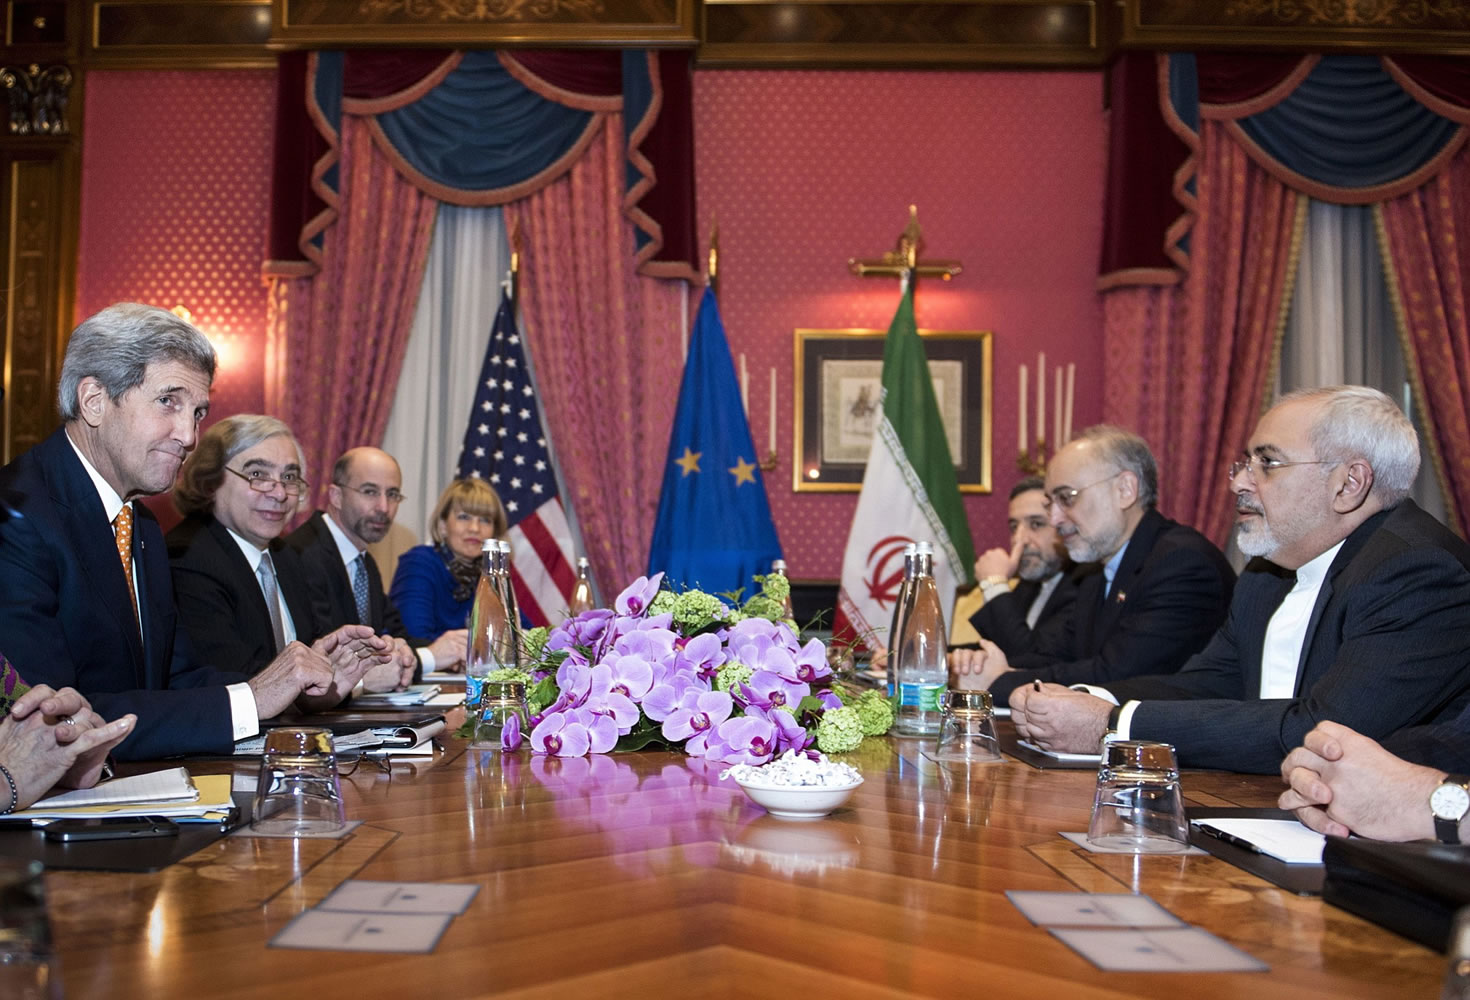 U.S. Secretary of State John Kerry, left, U.S. Secretary of Energy Ernest Moniz, second left,  National Security Council point person on the Middle East Robert Malley, third left, and European Union Political Director Helga Schmid.